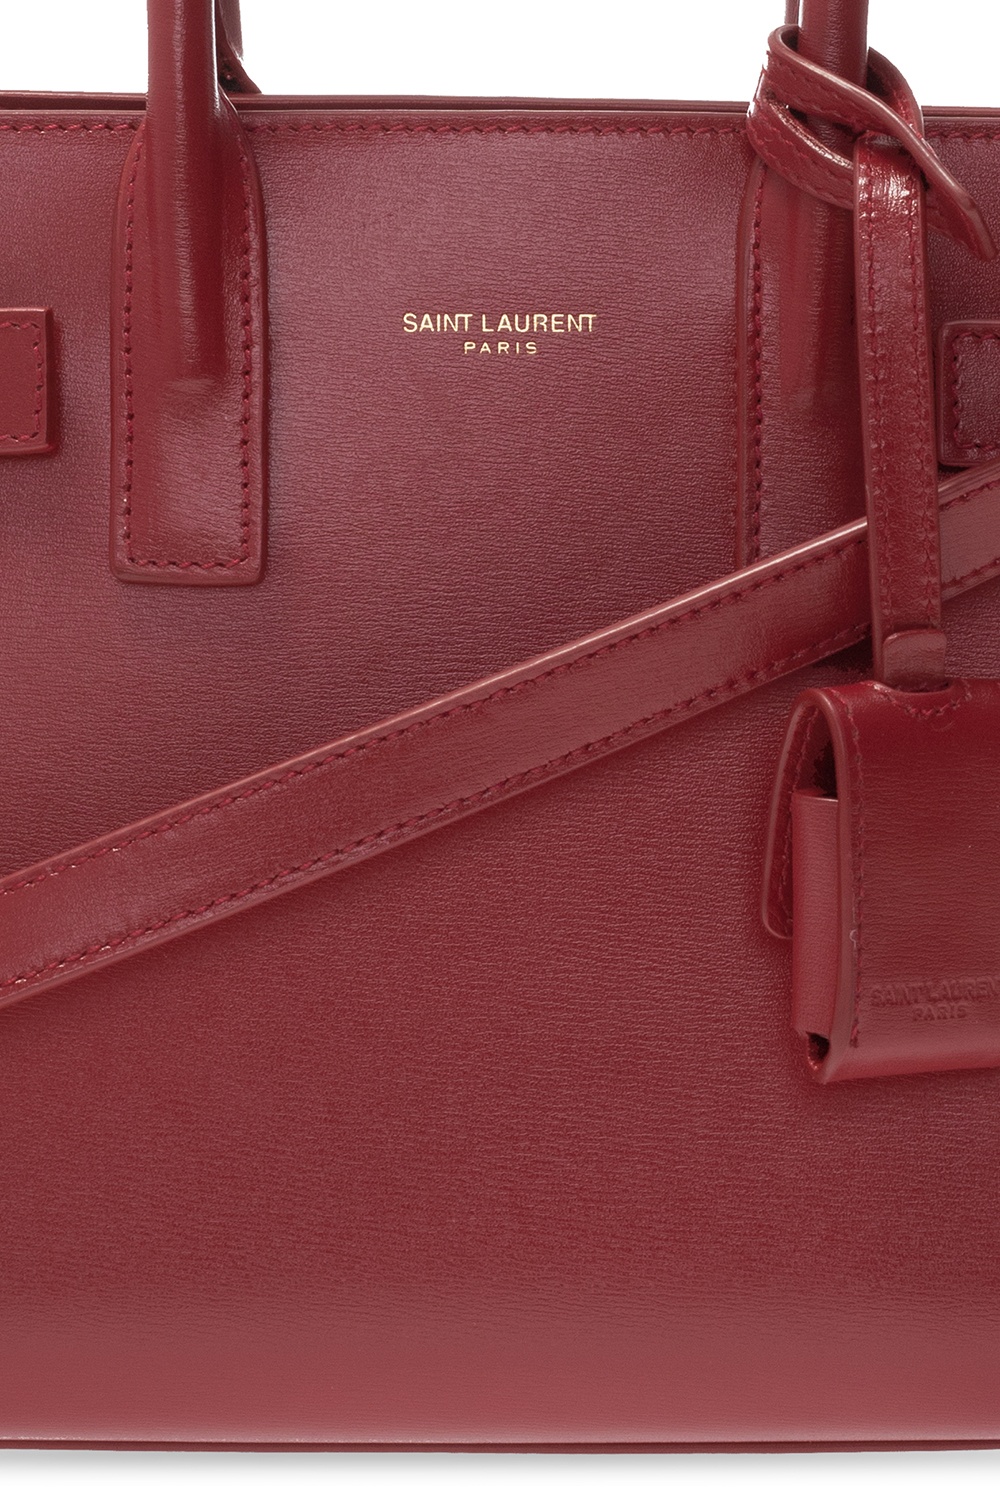 Saint Laurent Red Baby Sac de Jour Tote - Red - Totes